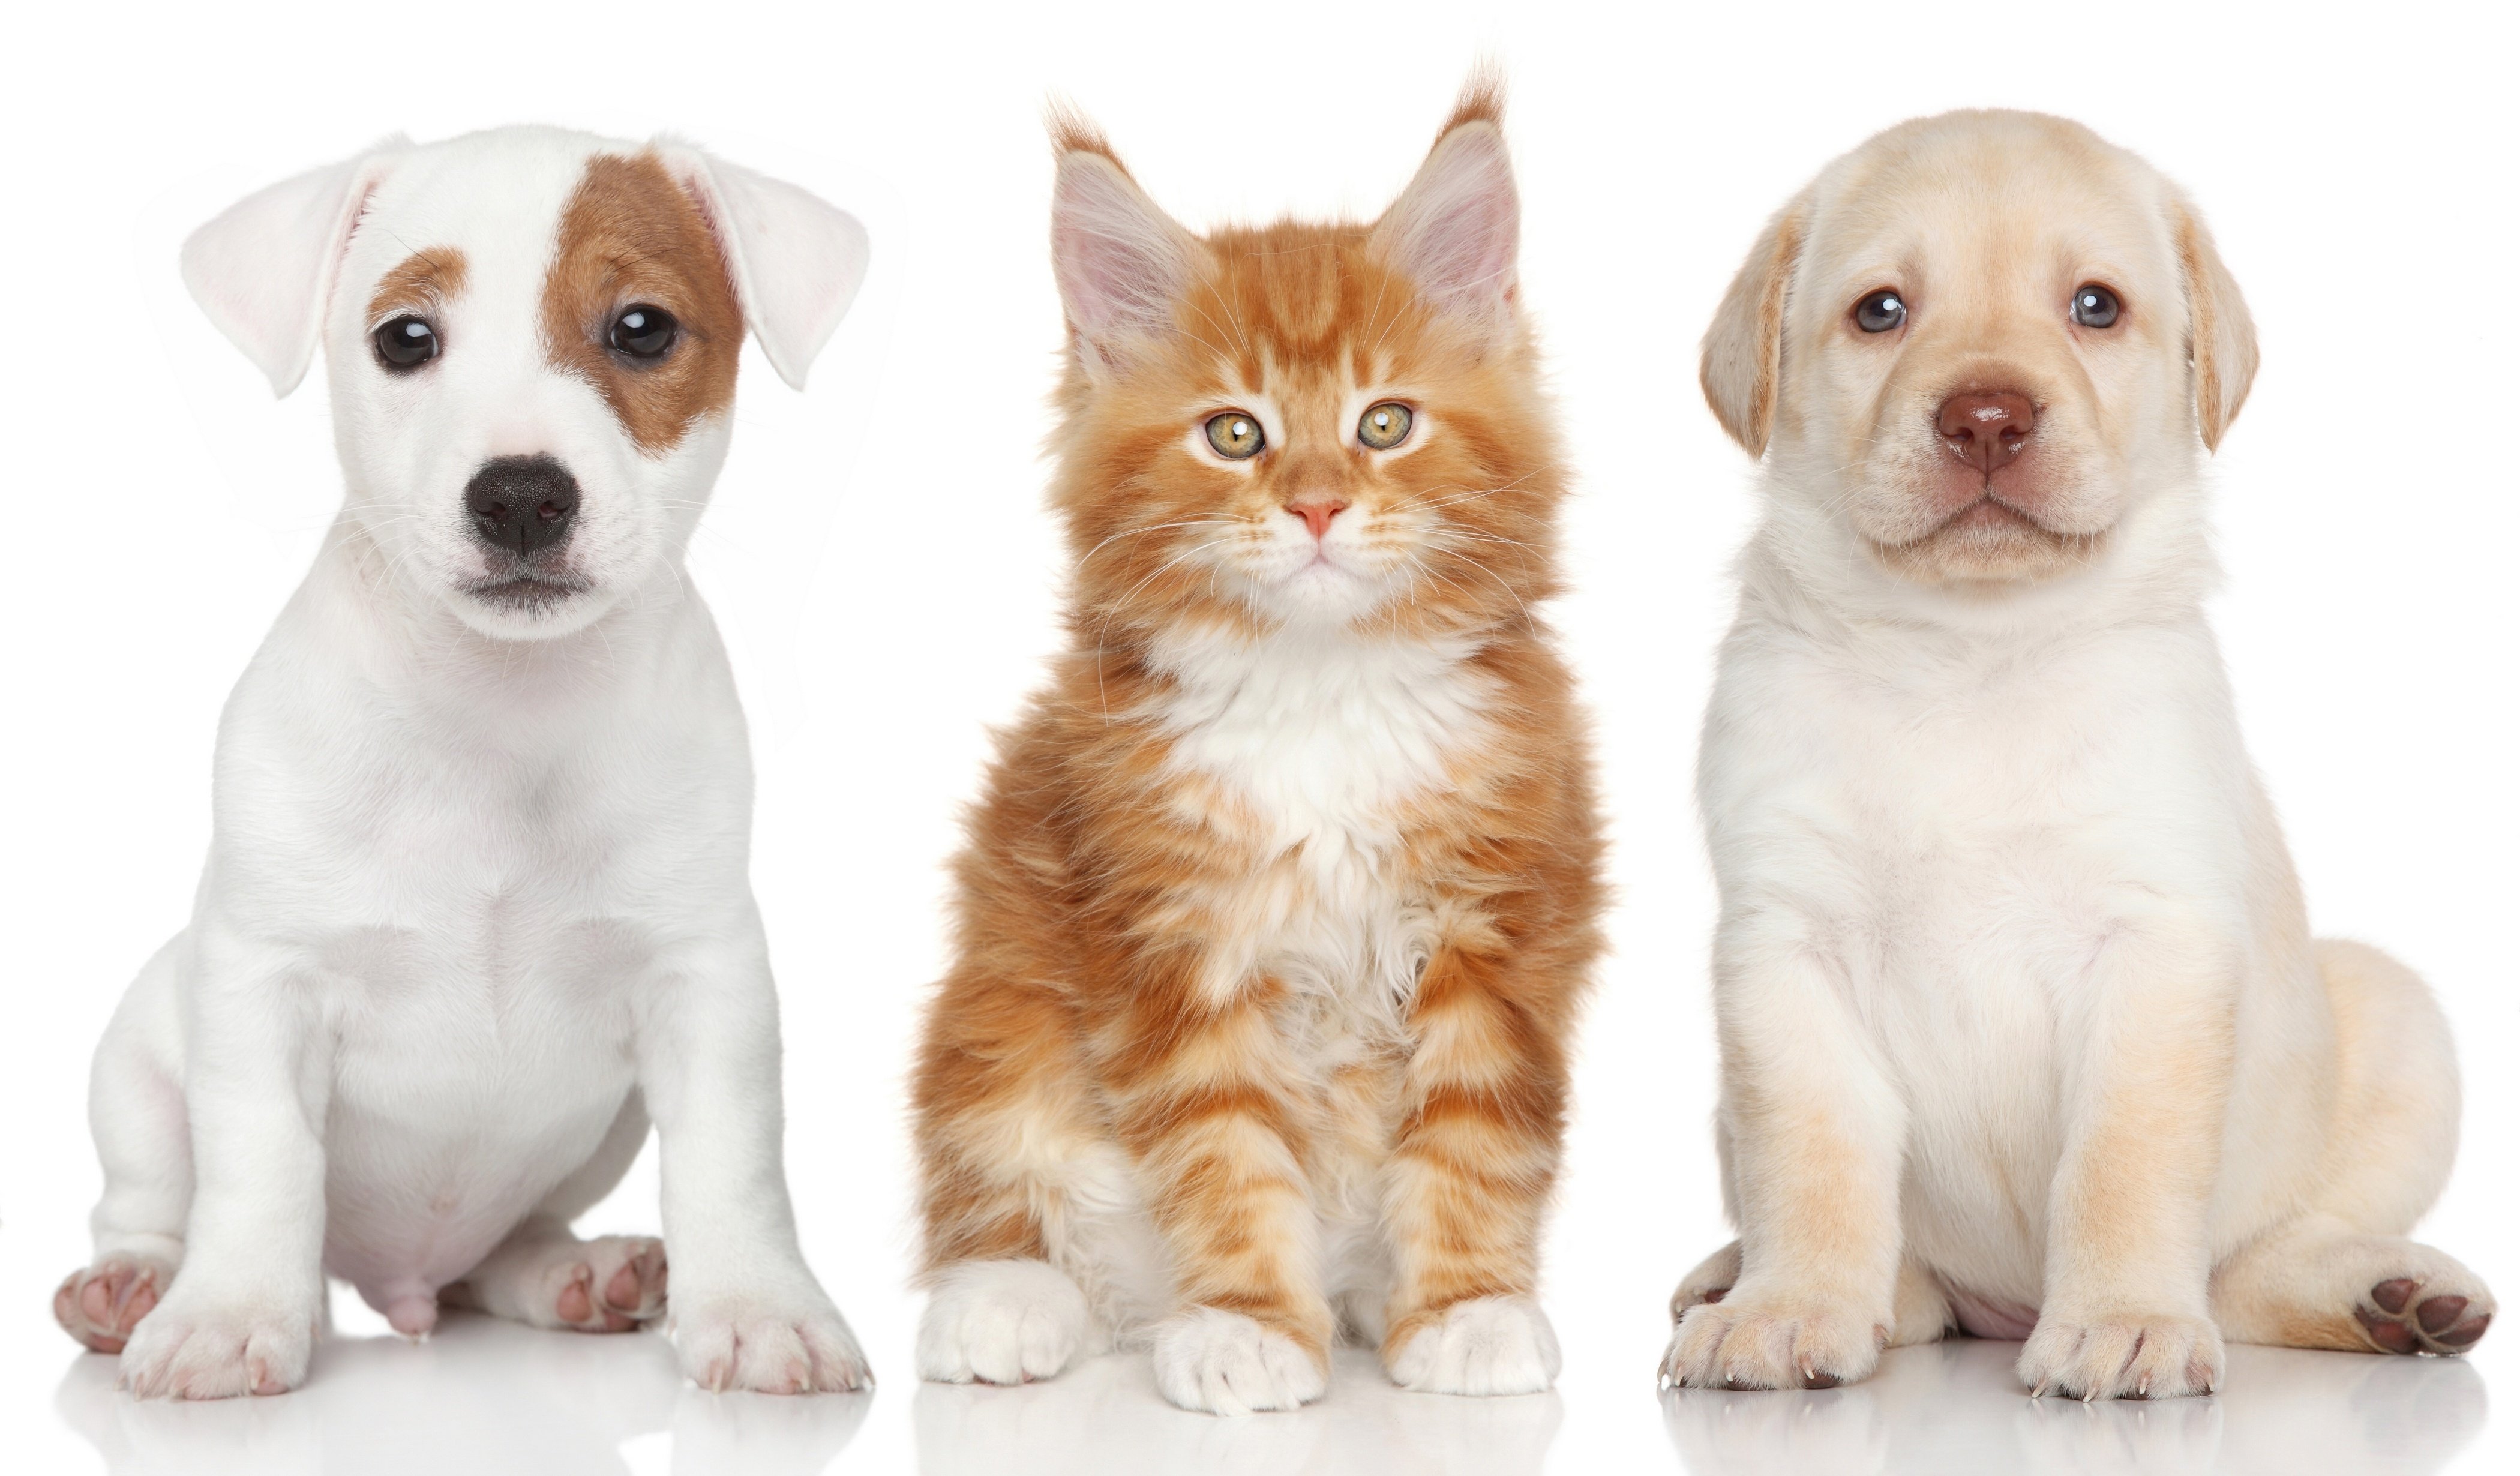 Cat And Dog Wallpapers High Quality | Download Free